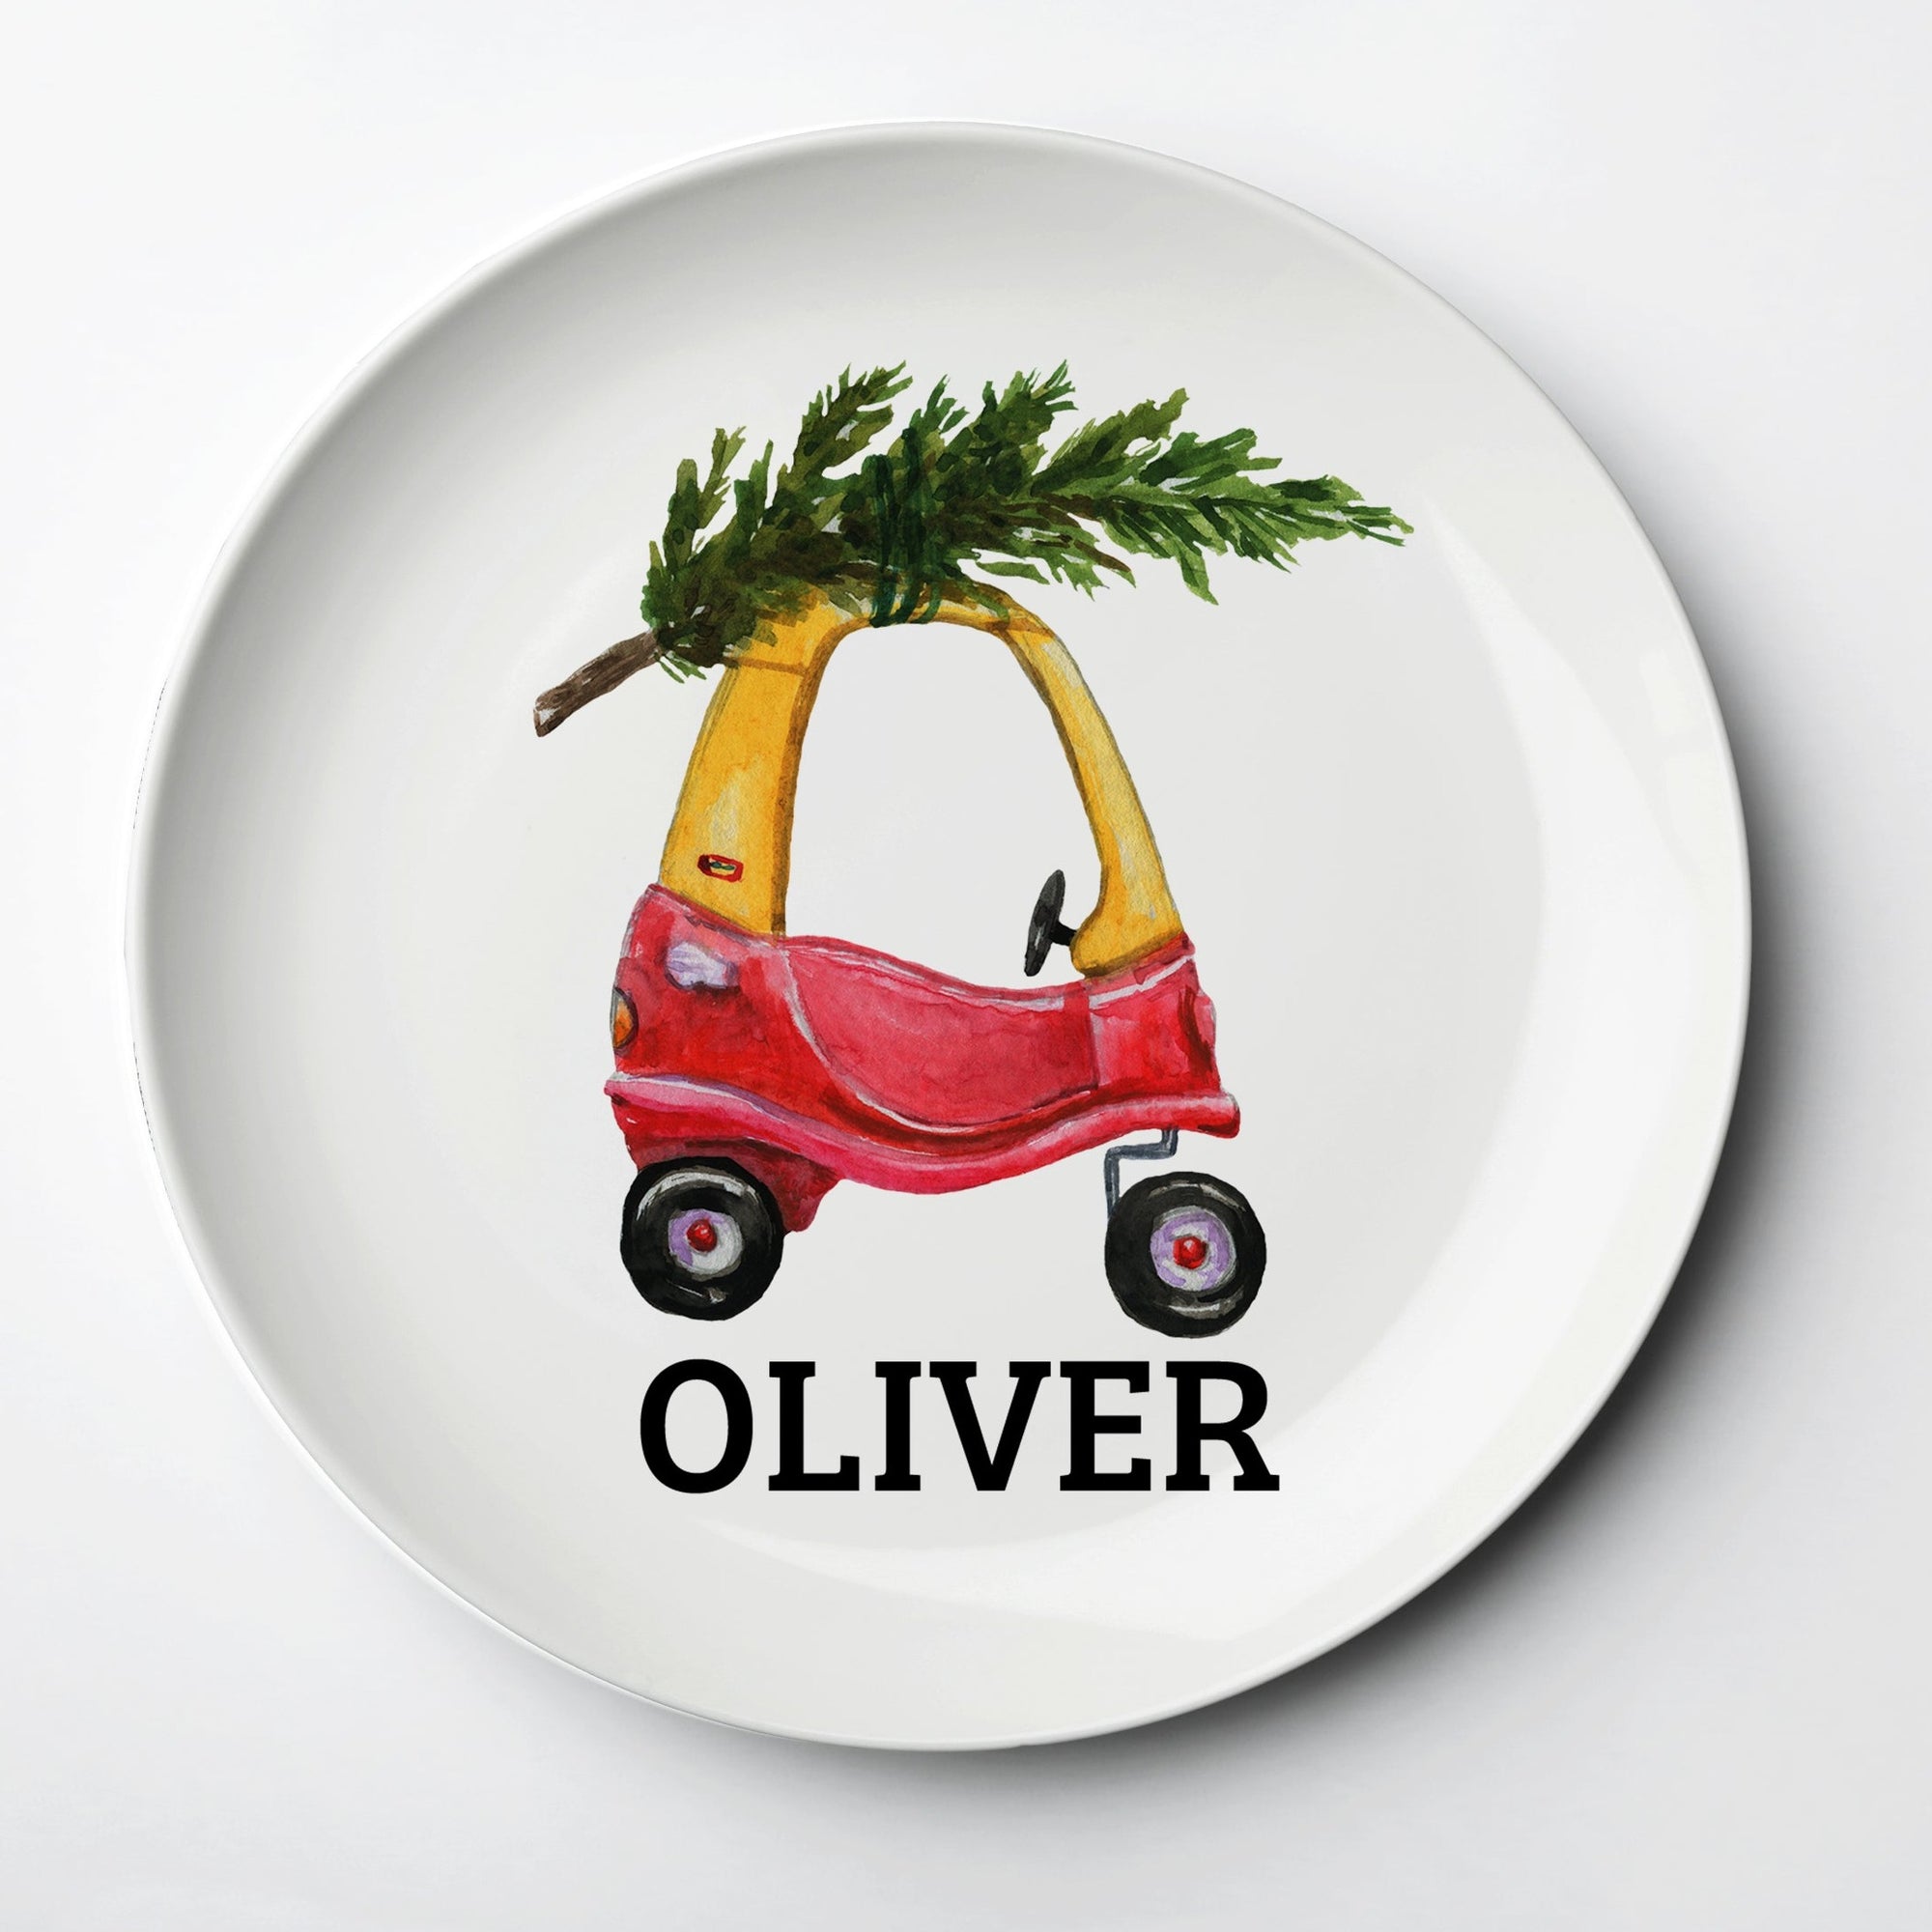 Toy Car Personalized Plate, with a christmas tree on top of the care. Thick polymer plate that will last for years. Unbreakable, Dishwasher and Microwave safe